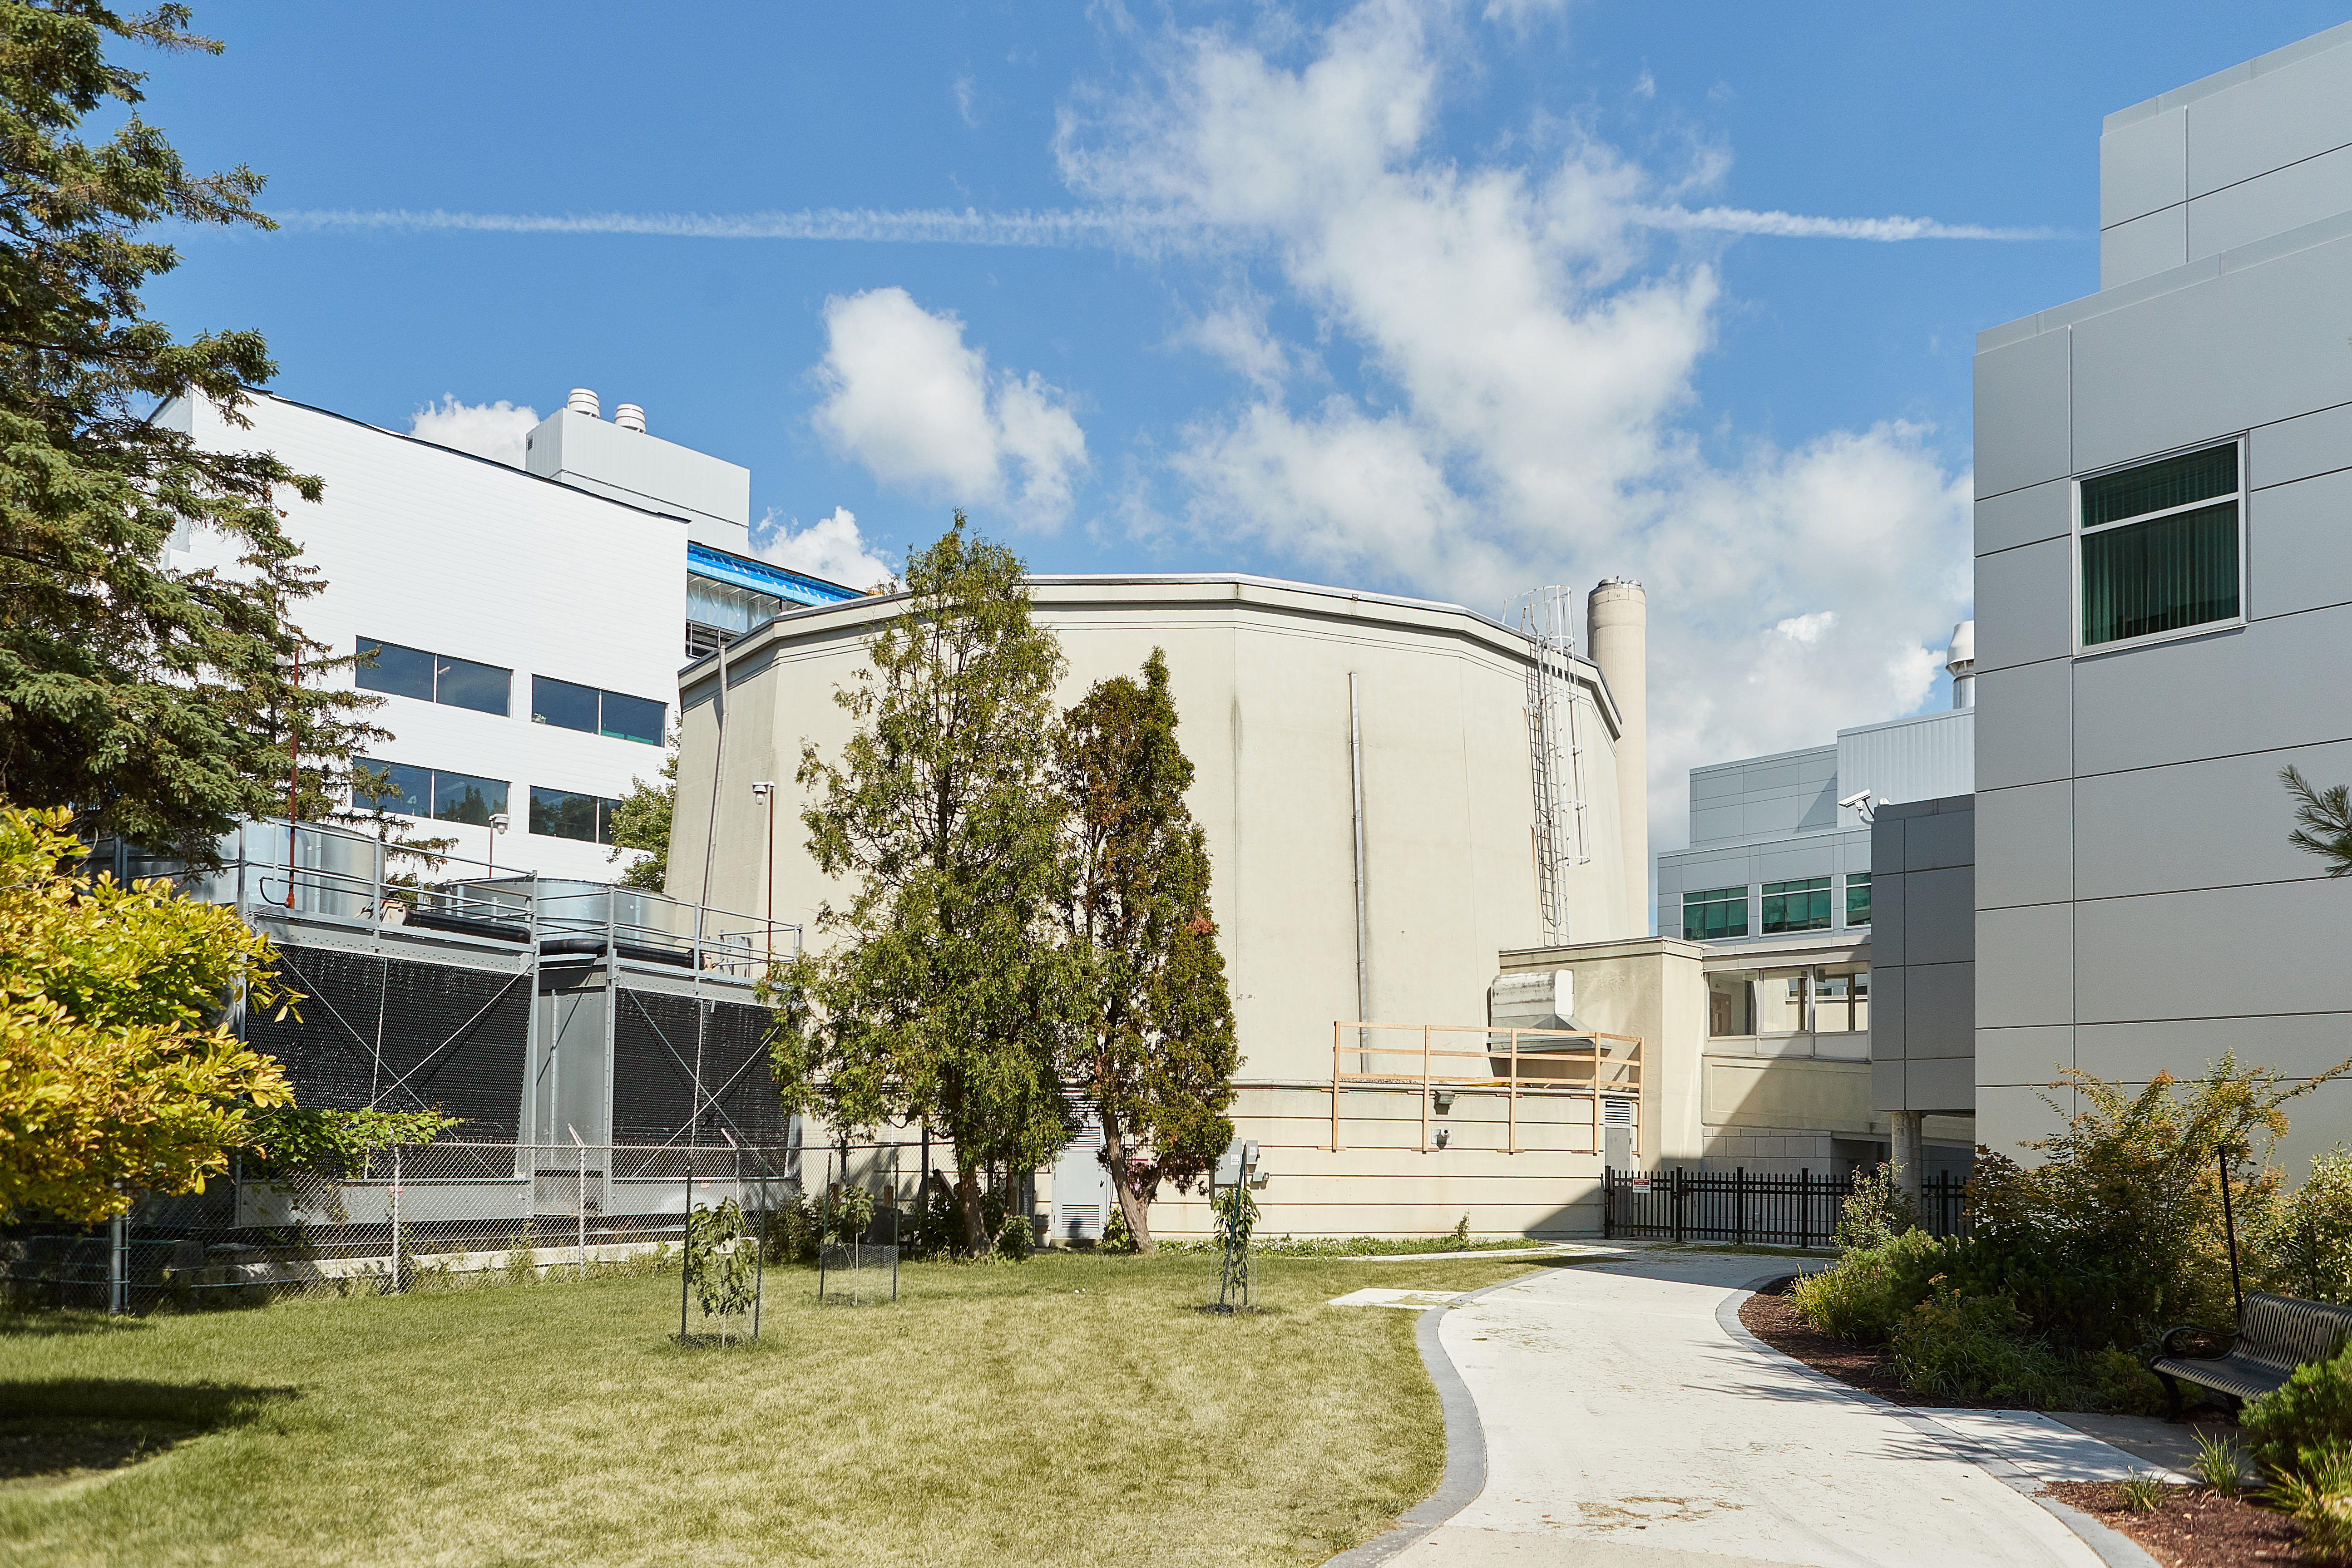 Nuclear reactor at Hamilton’s McMaster University relicensed for 20 more years